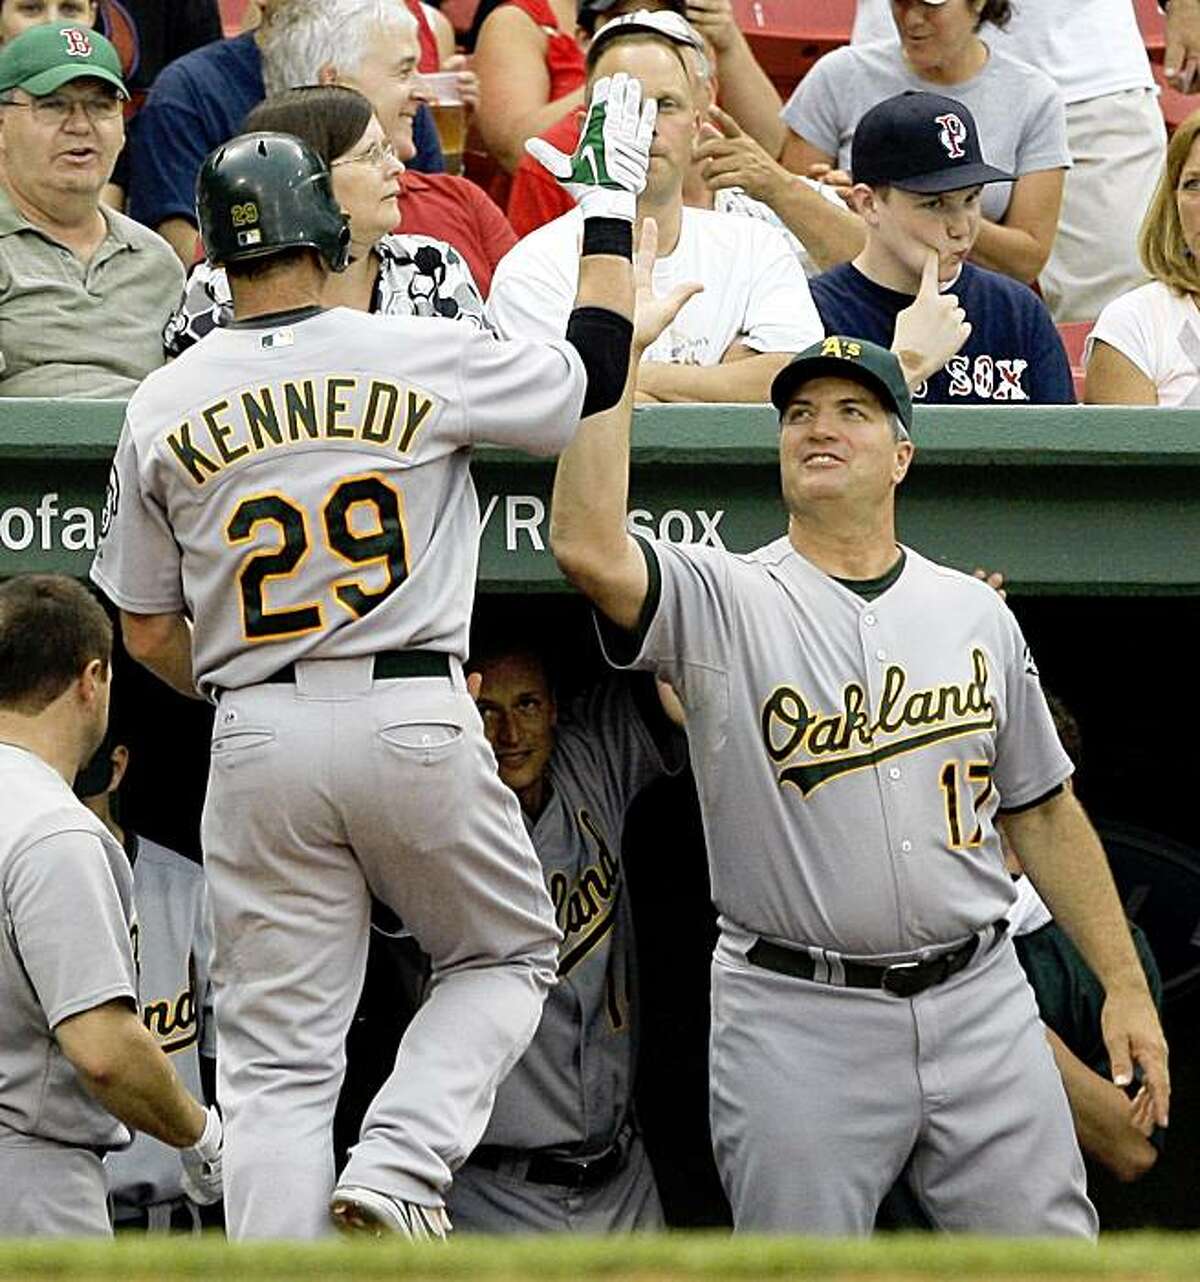 Oakland Athletics' Adam Kennedy (29) receives a high-five from manager Bob Geren, right, after hitting a solo home run against the Boston Red Sox in the first inning of a baseball game at Fenway Park in Boston, Wednesday, July 29, 2009.